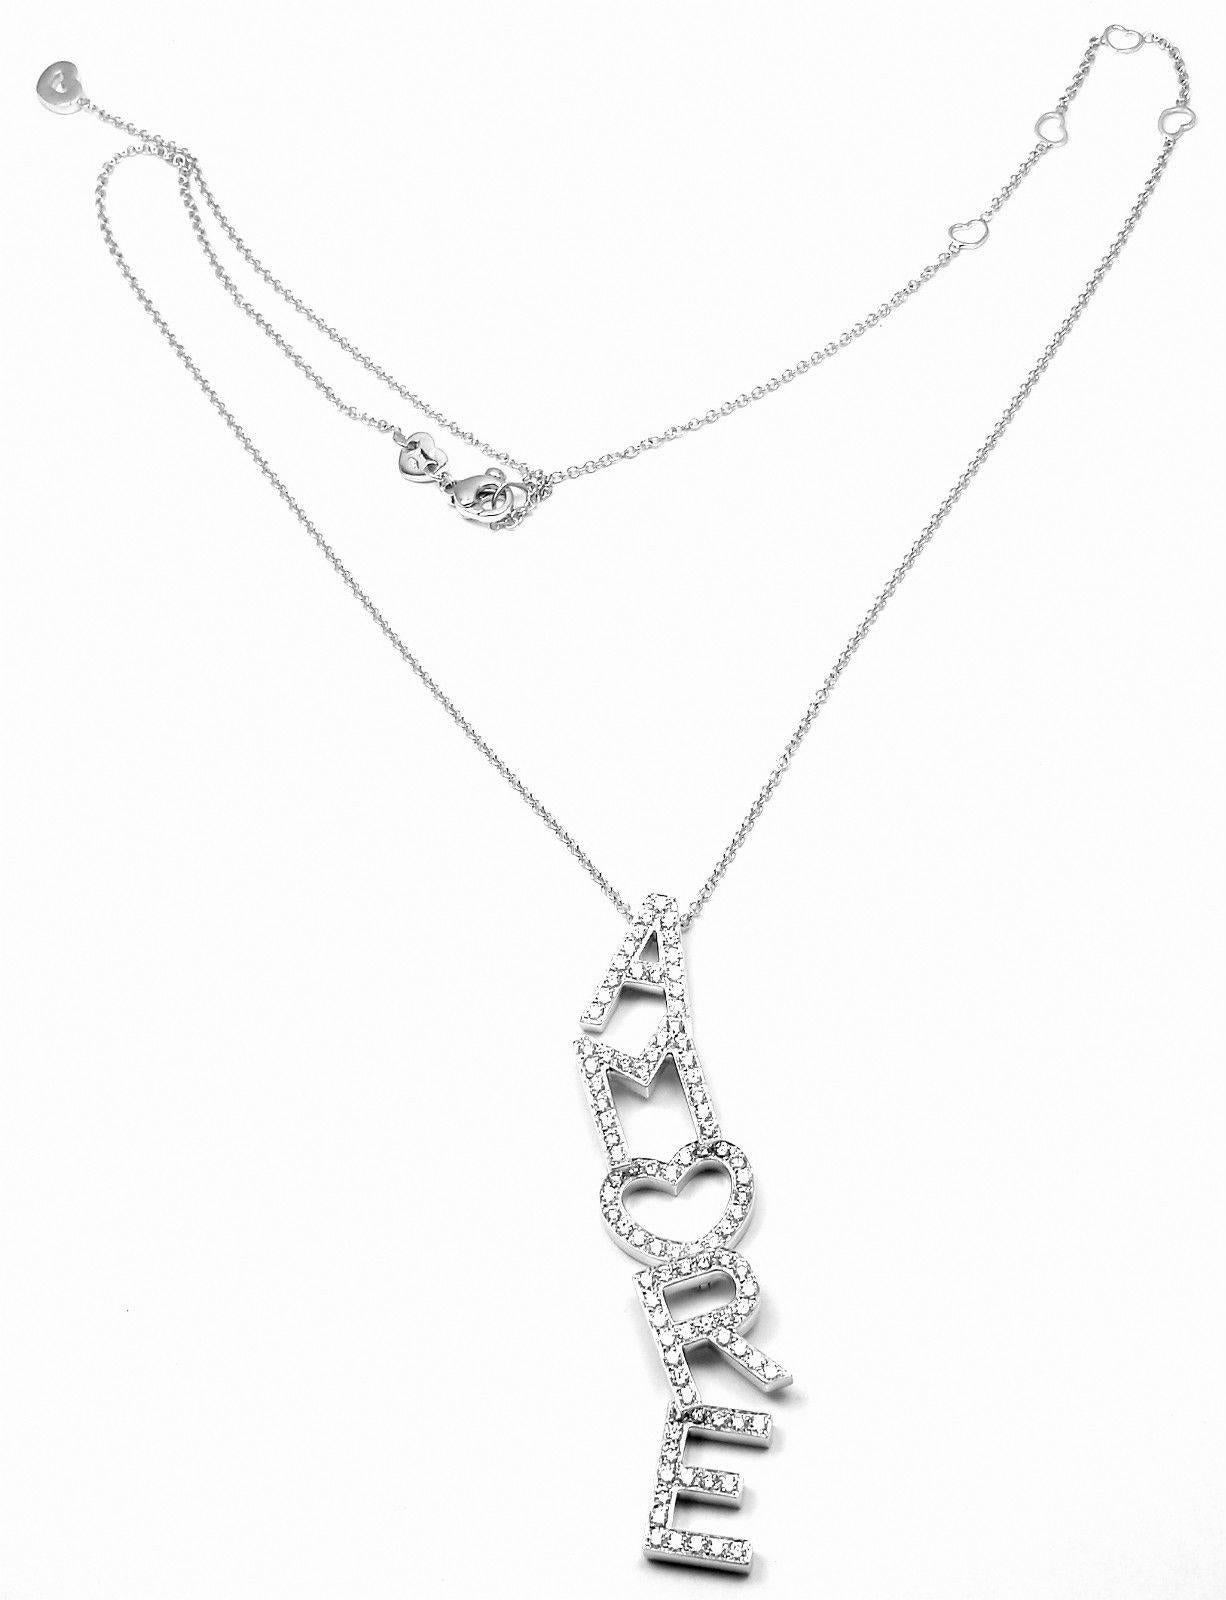 18k White Gold Amore 2.41ct Diamond Necklace by Pasquale Bruni. 
With Round brilliant cut diamonds VS1 clarity, G color total weight approx. 2.41ct 
This necklace comes with Box And Certificate.  

Details: 
Length: 28